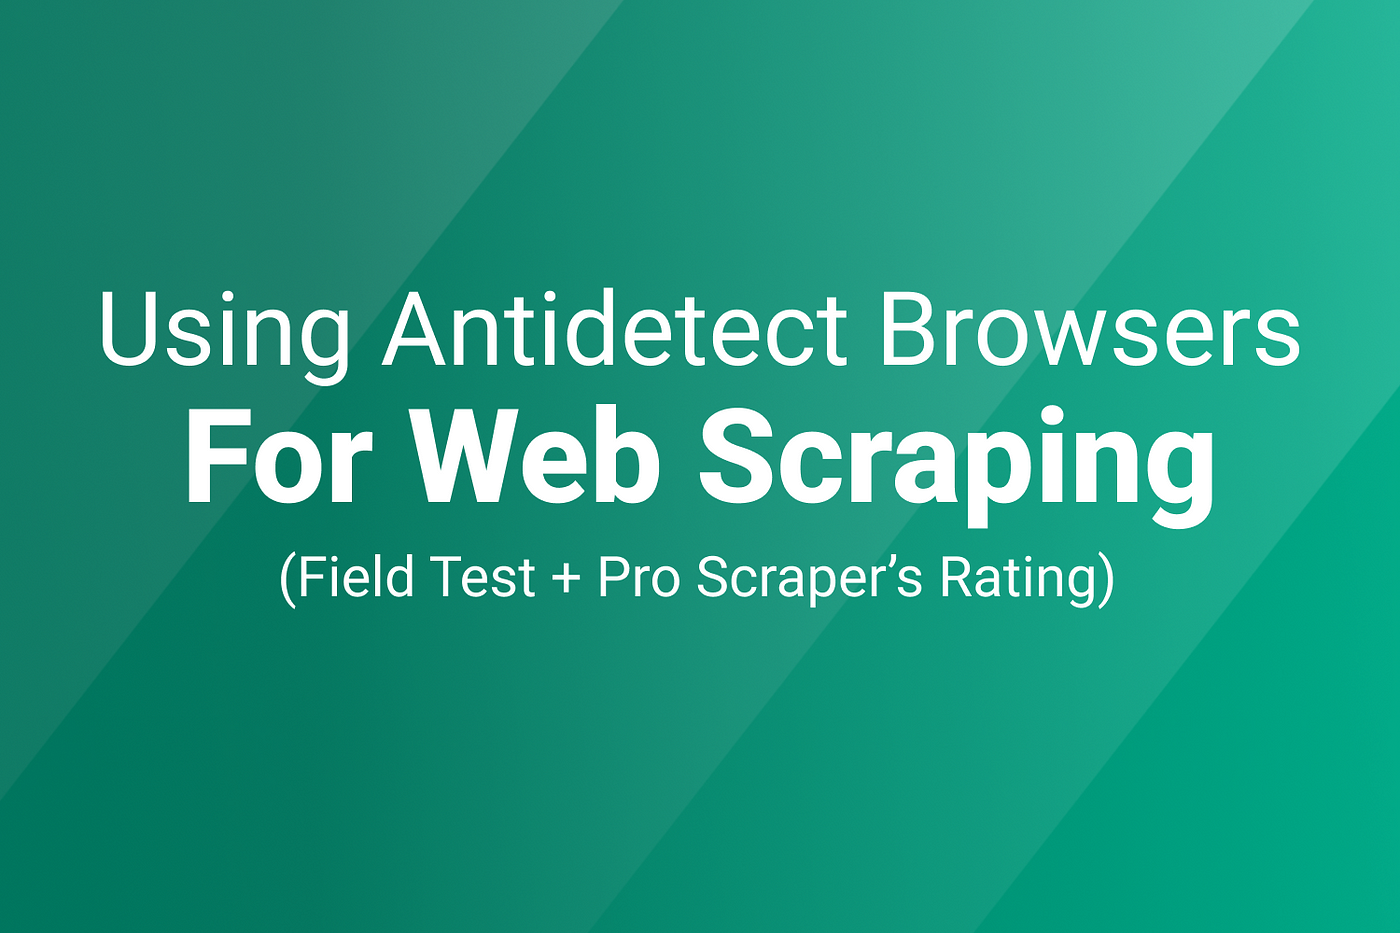 The leading antidetect browser for web scraping and multi-accounting